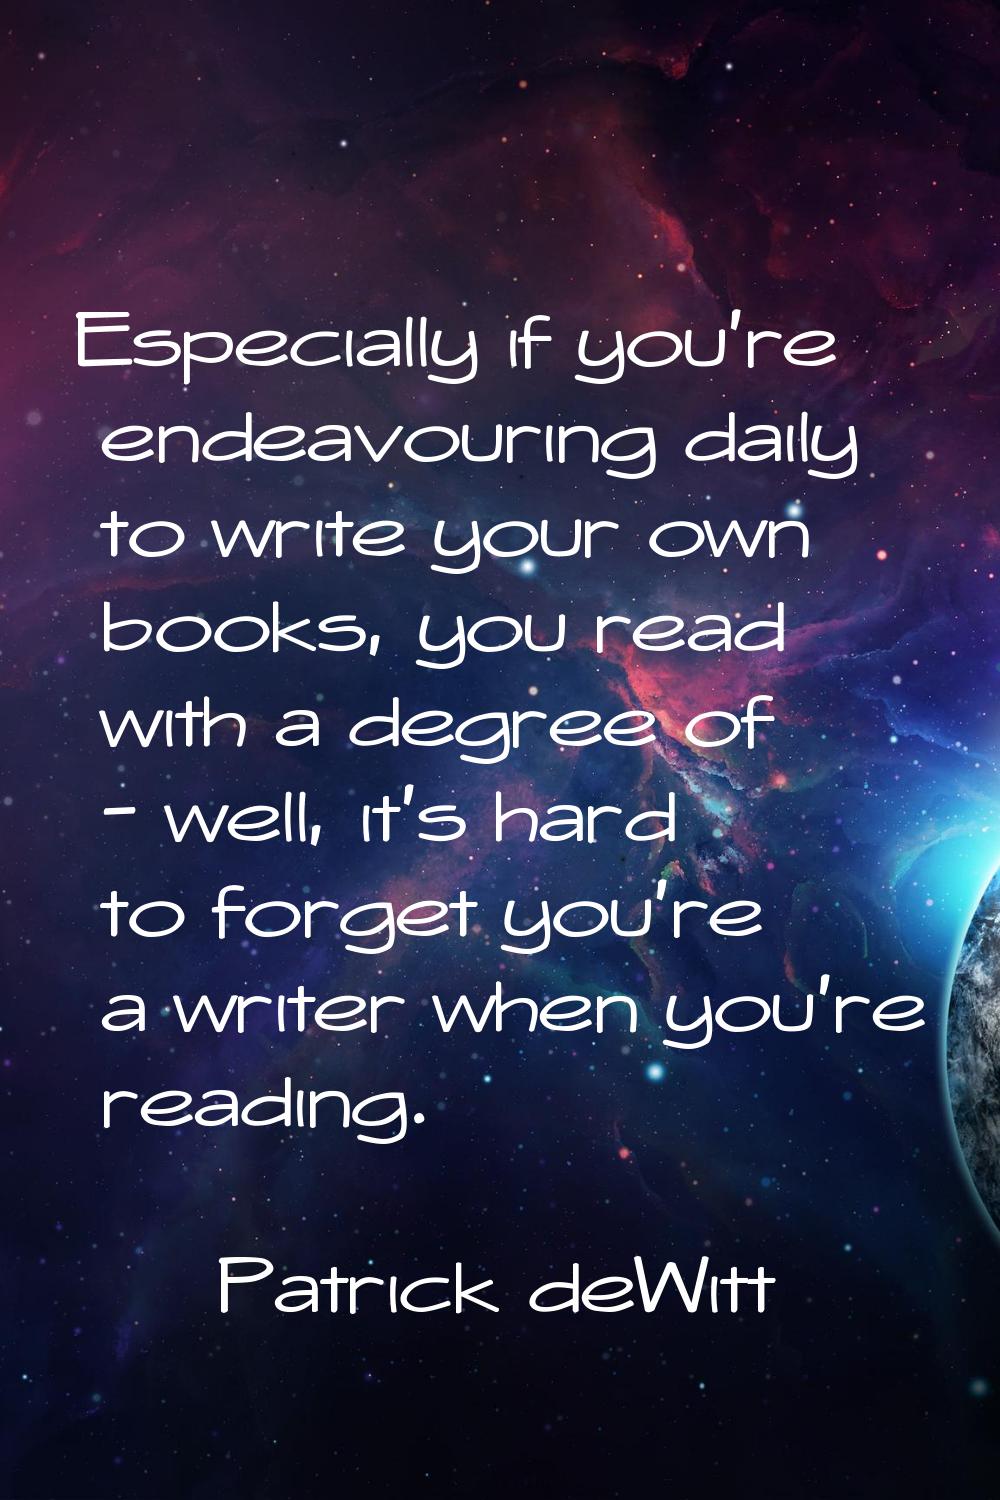 Especially if you're endeavouring daily to write your own books, you read with a degree of - well, 